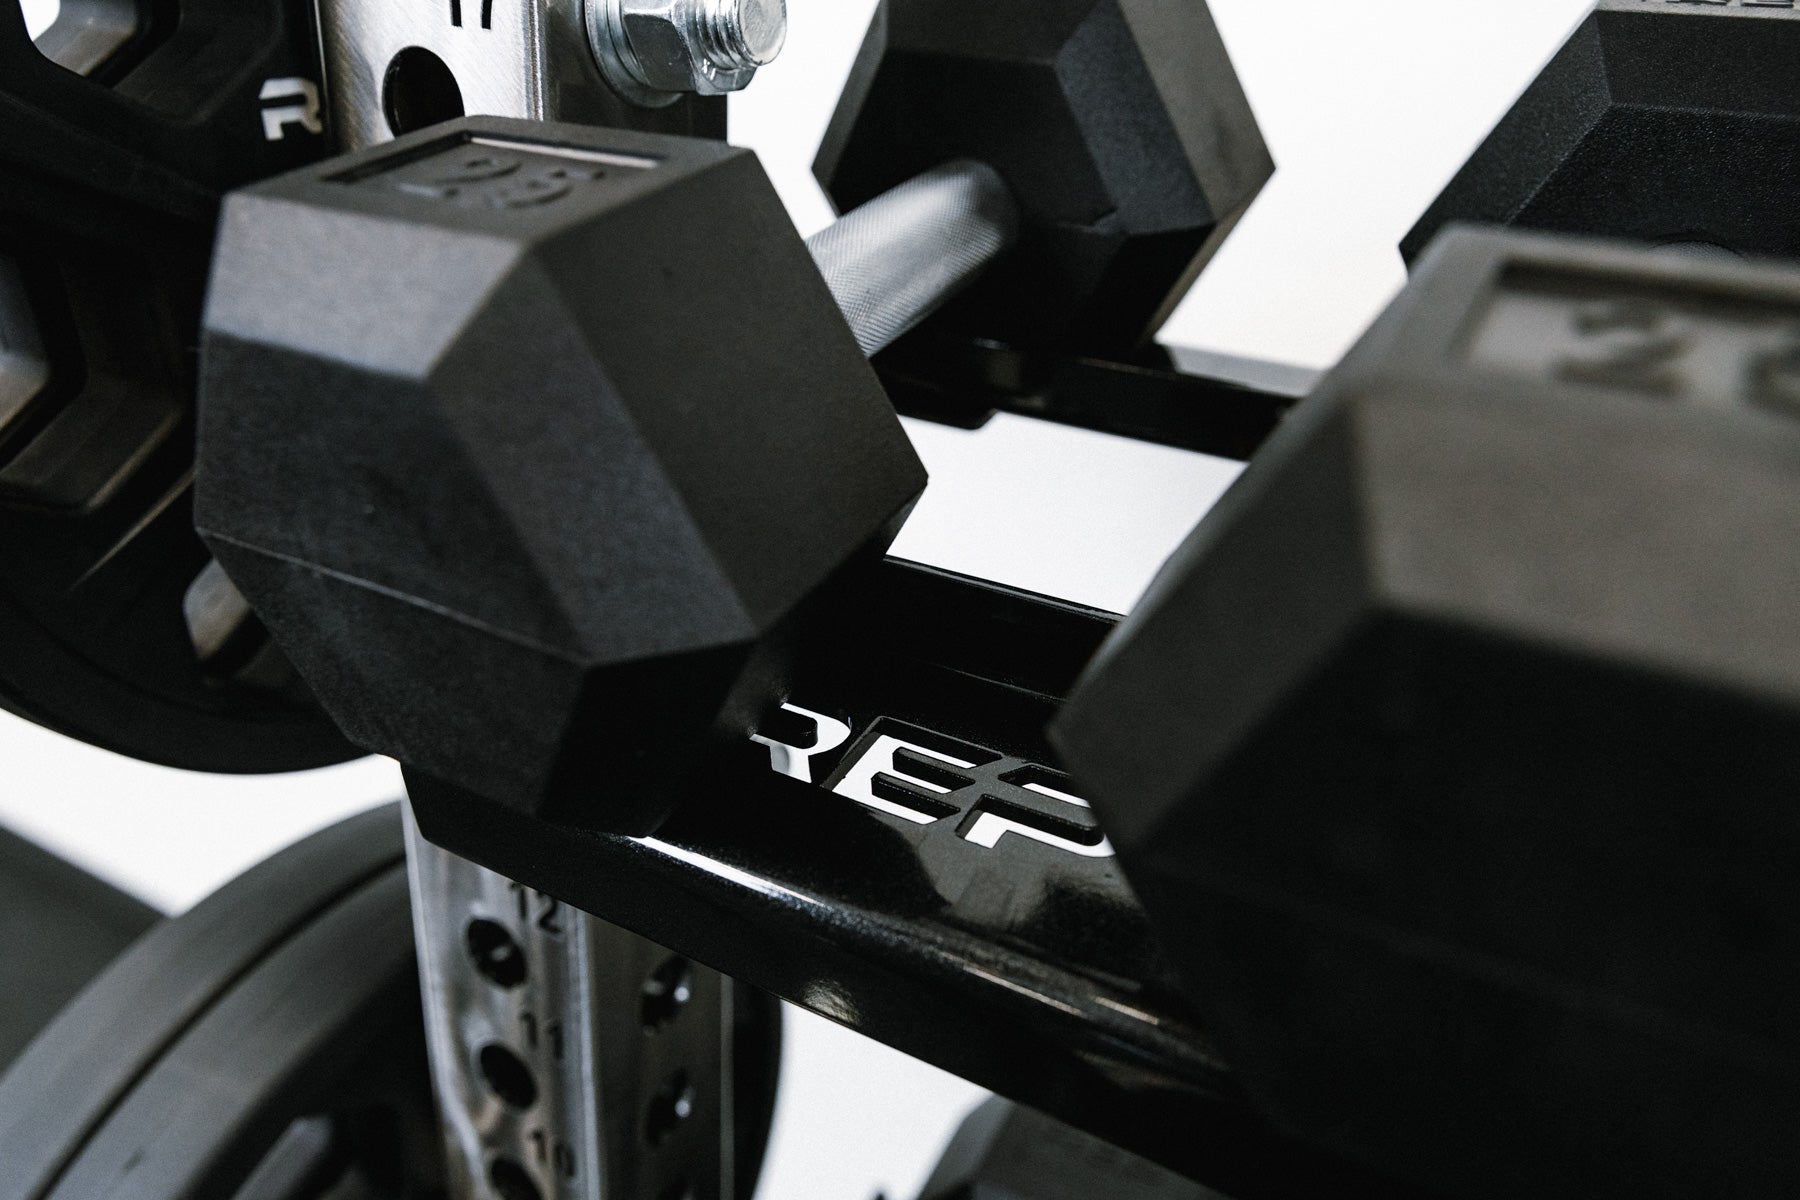 Dumbbell Storage Shelf - Close Up of Shelf and REP Hex Dumbbells